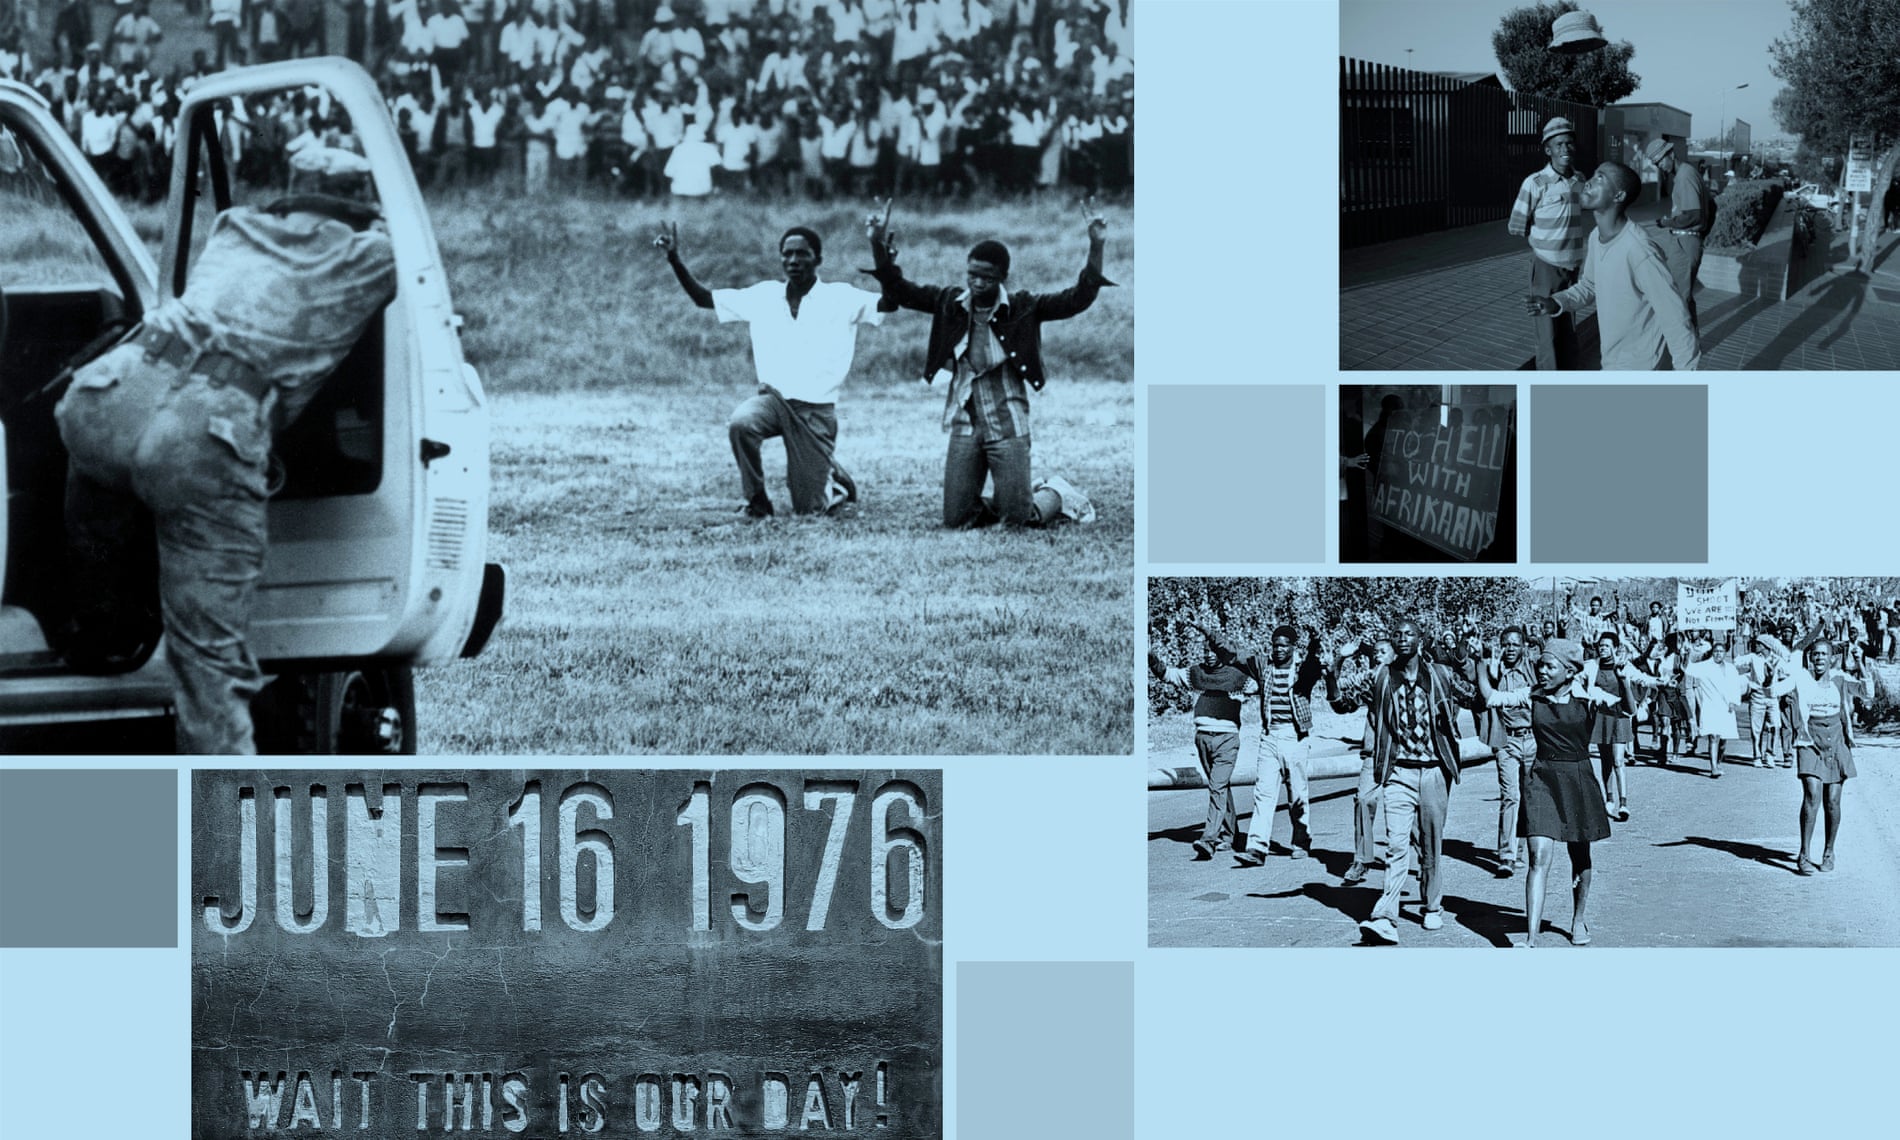 Composite of images related to the Soweto uprising